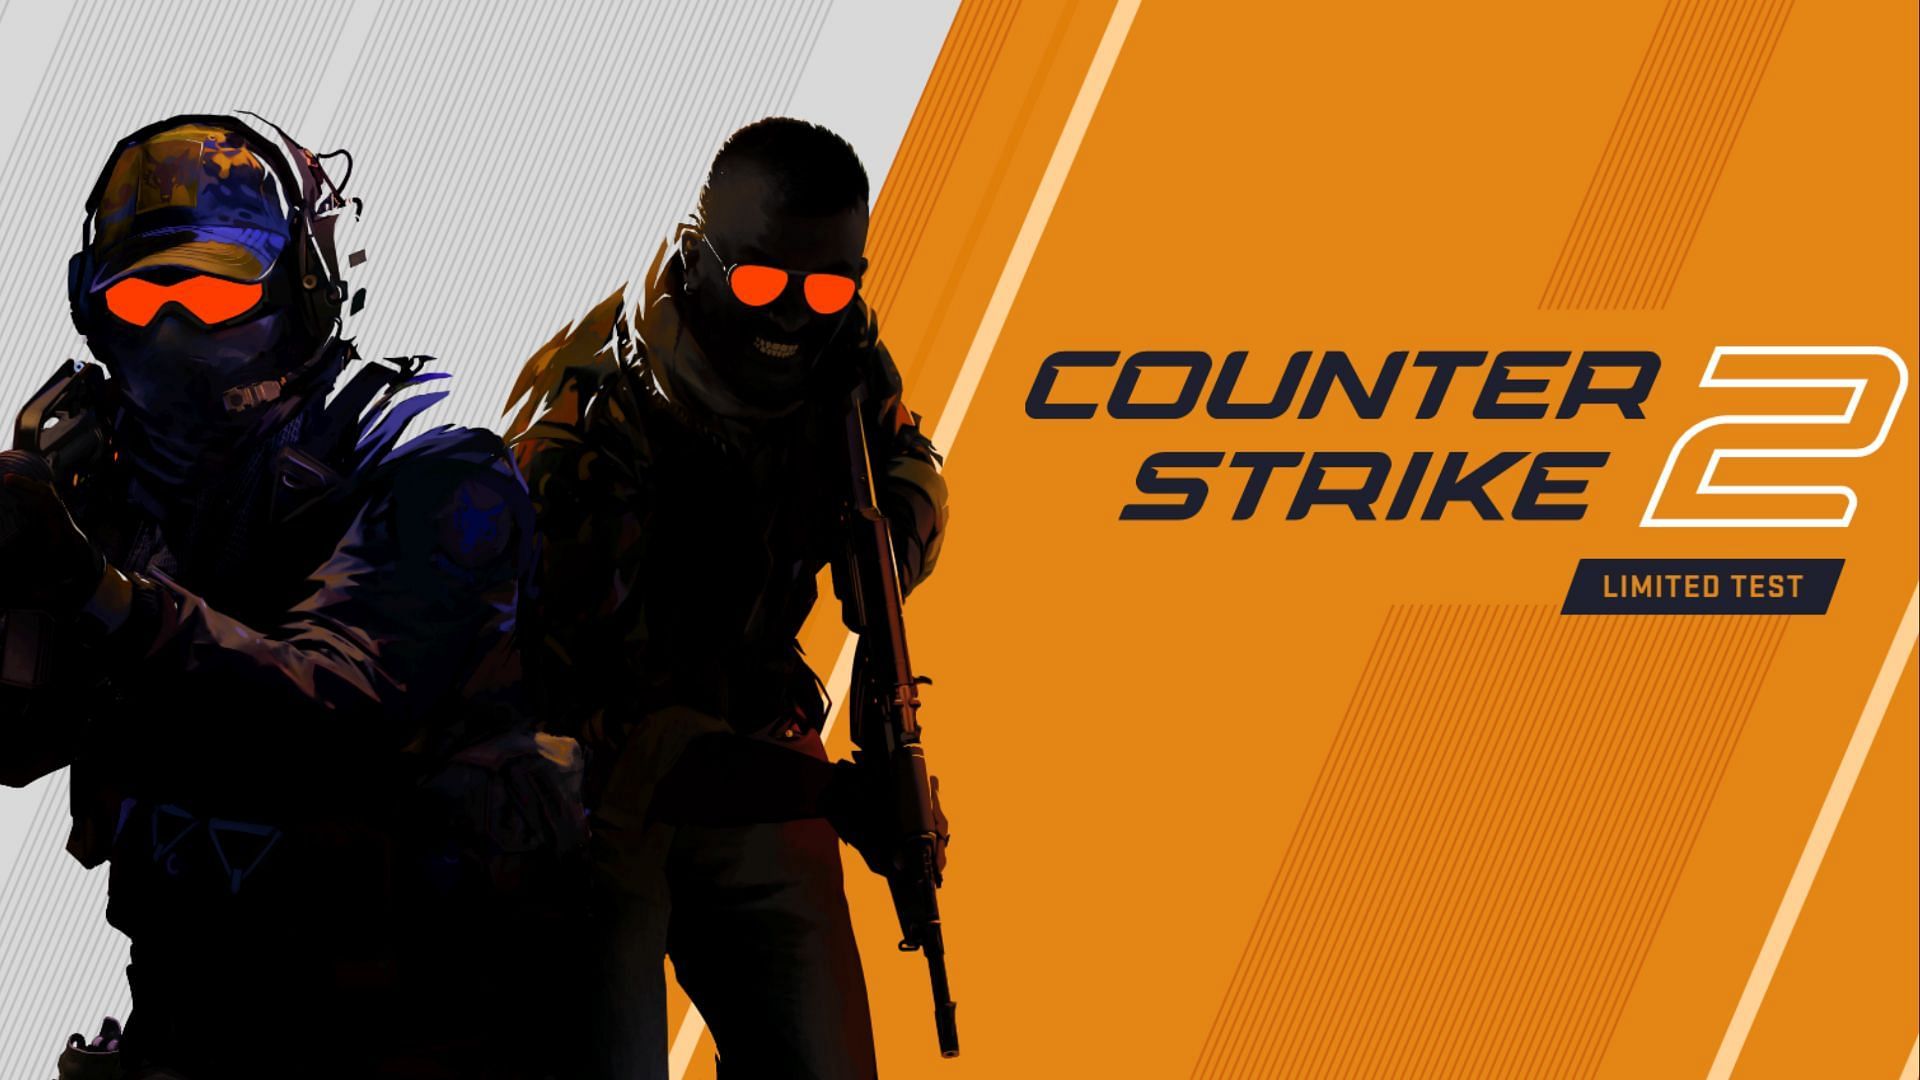 Counter Strike 2 limited beta test is available (Image via Valve)